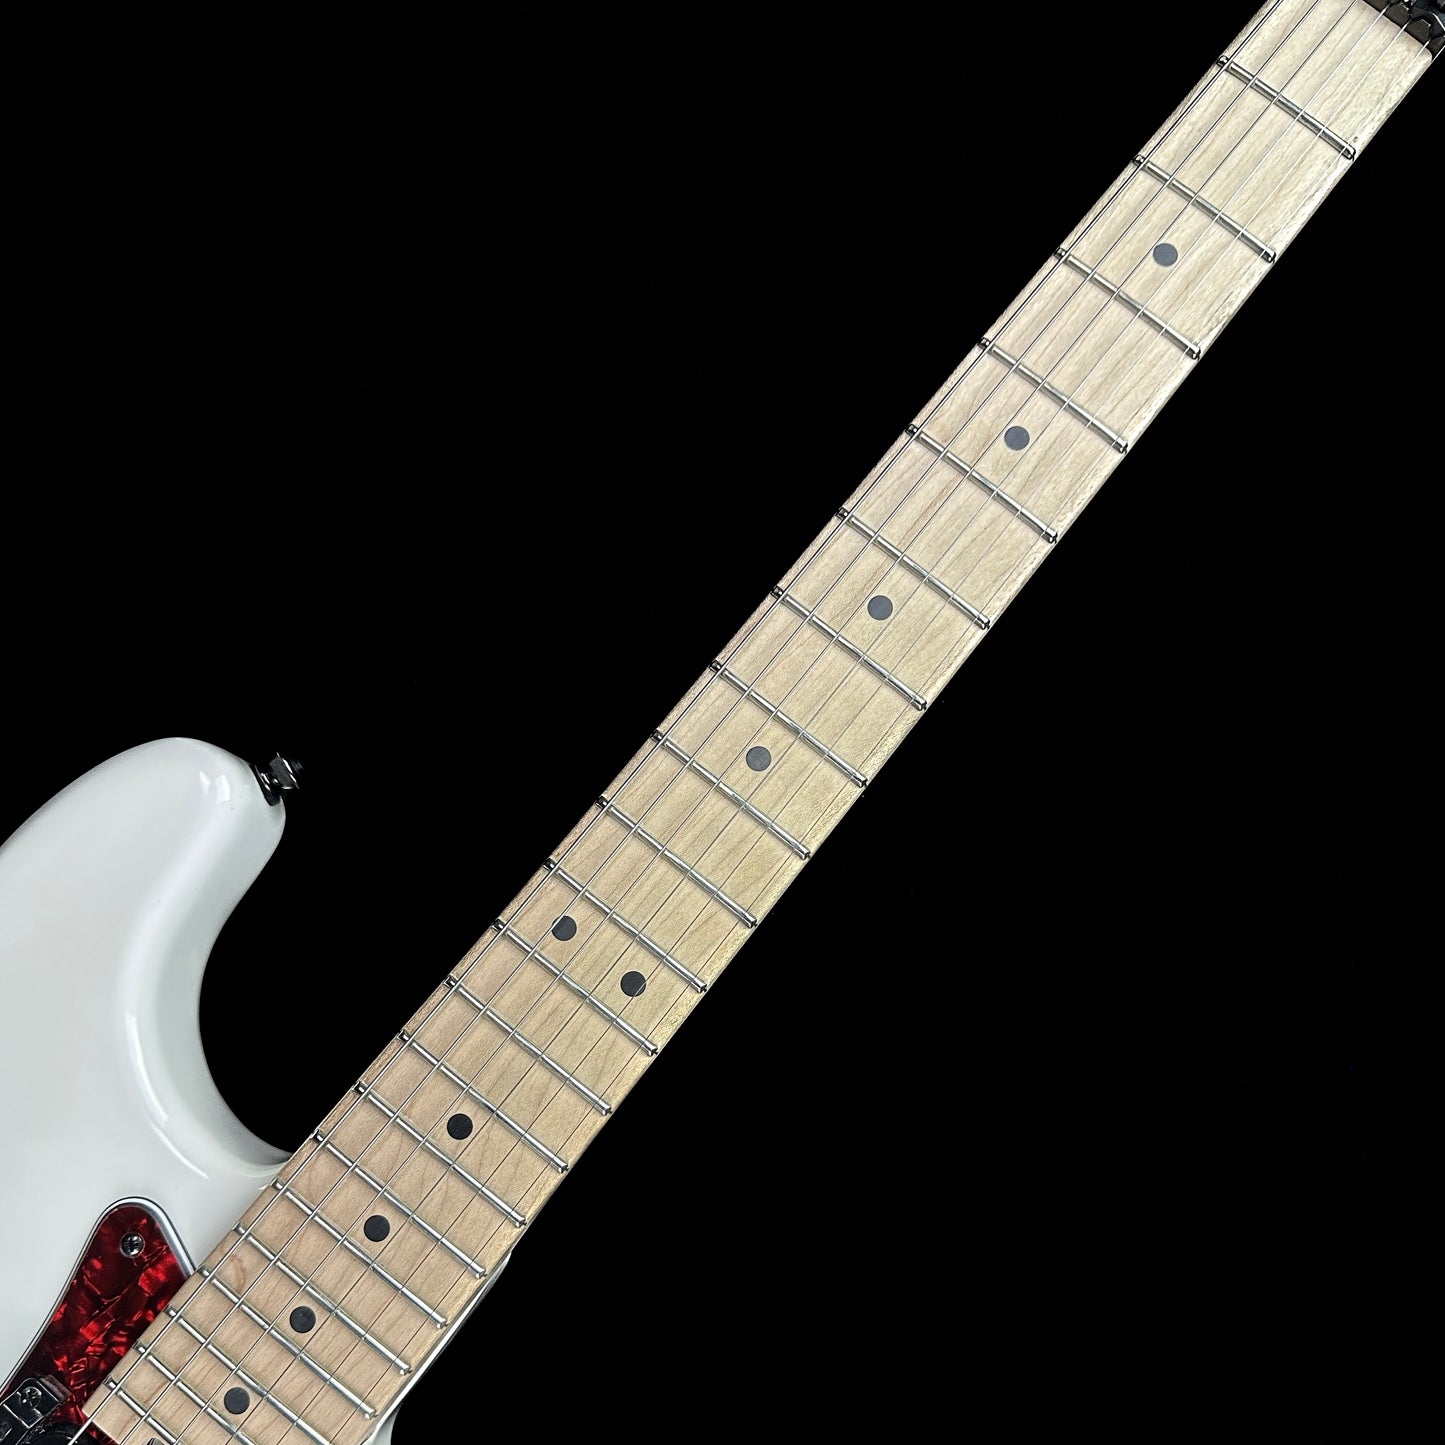 Fretboard of Used Charvel Pro-Mod So-Cal HH Style 1 Snow White.